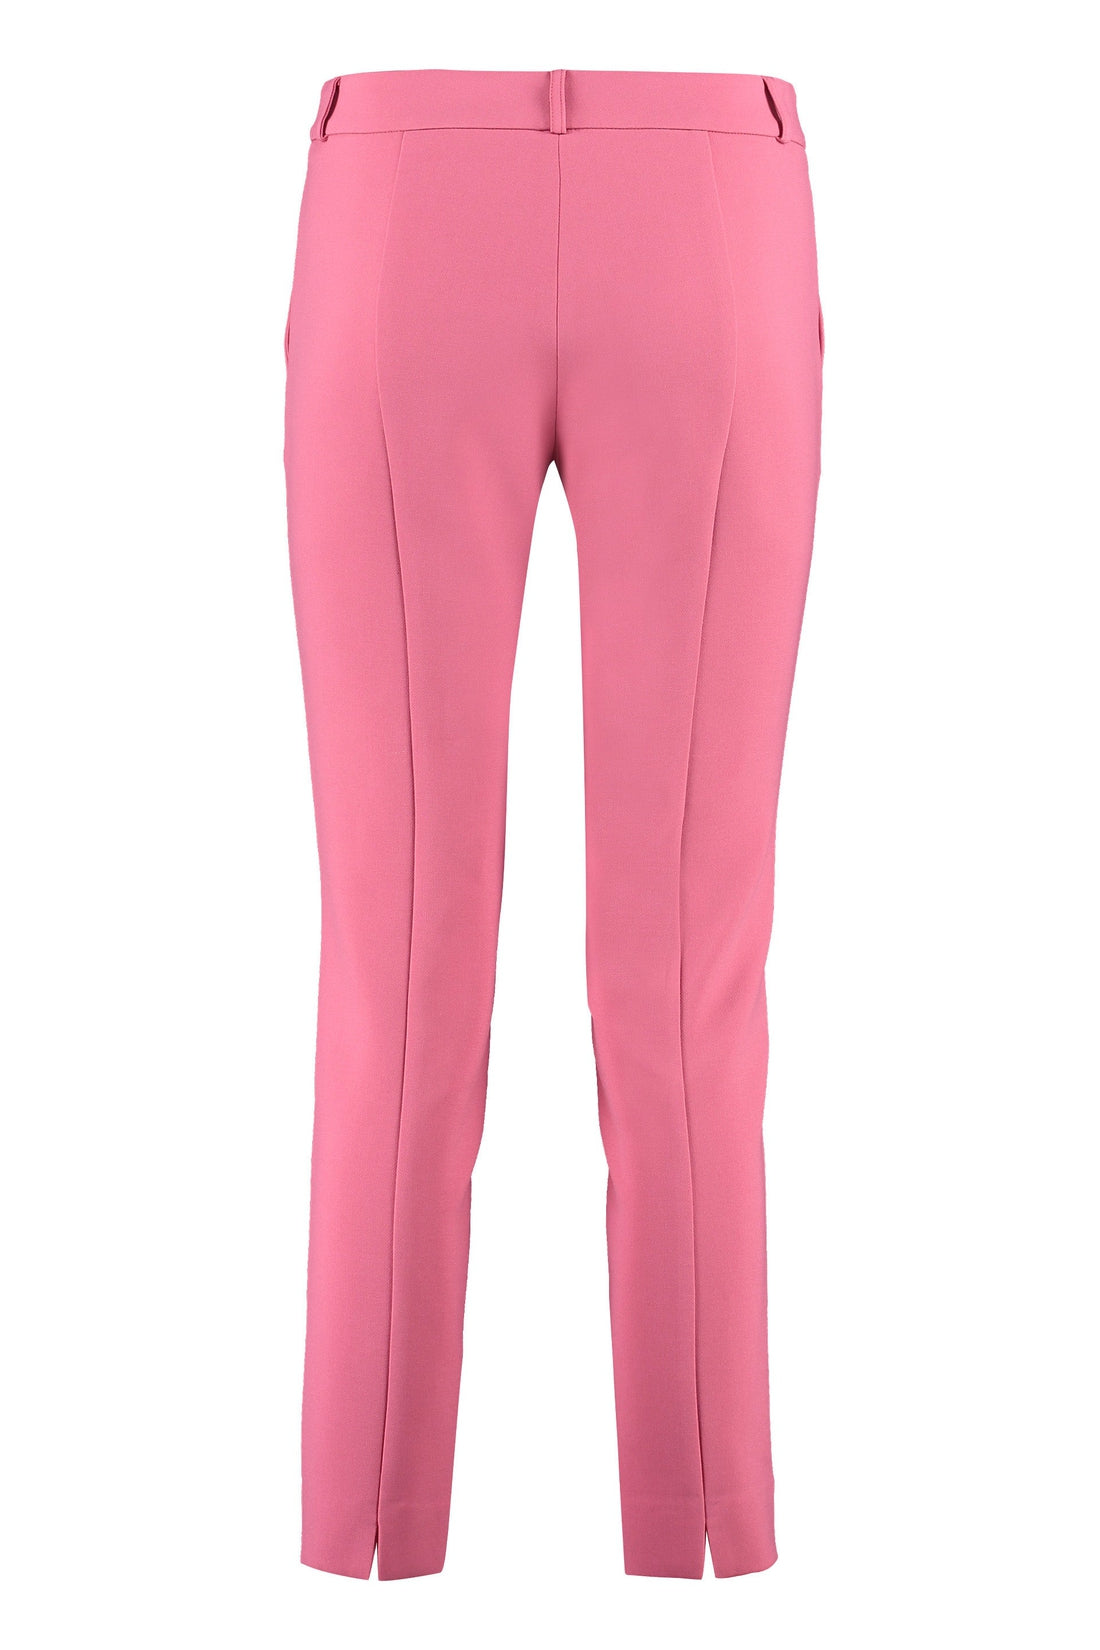 Simona Corsellini-OUTLET-SALE-Crepe pants with straight legs-ARCHIVIST